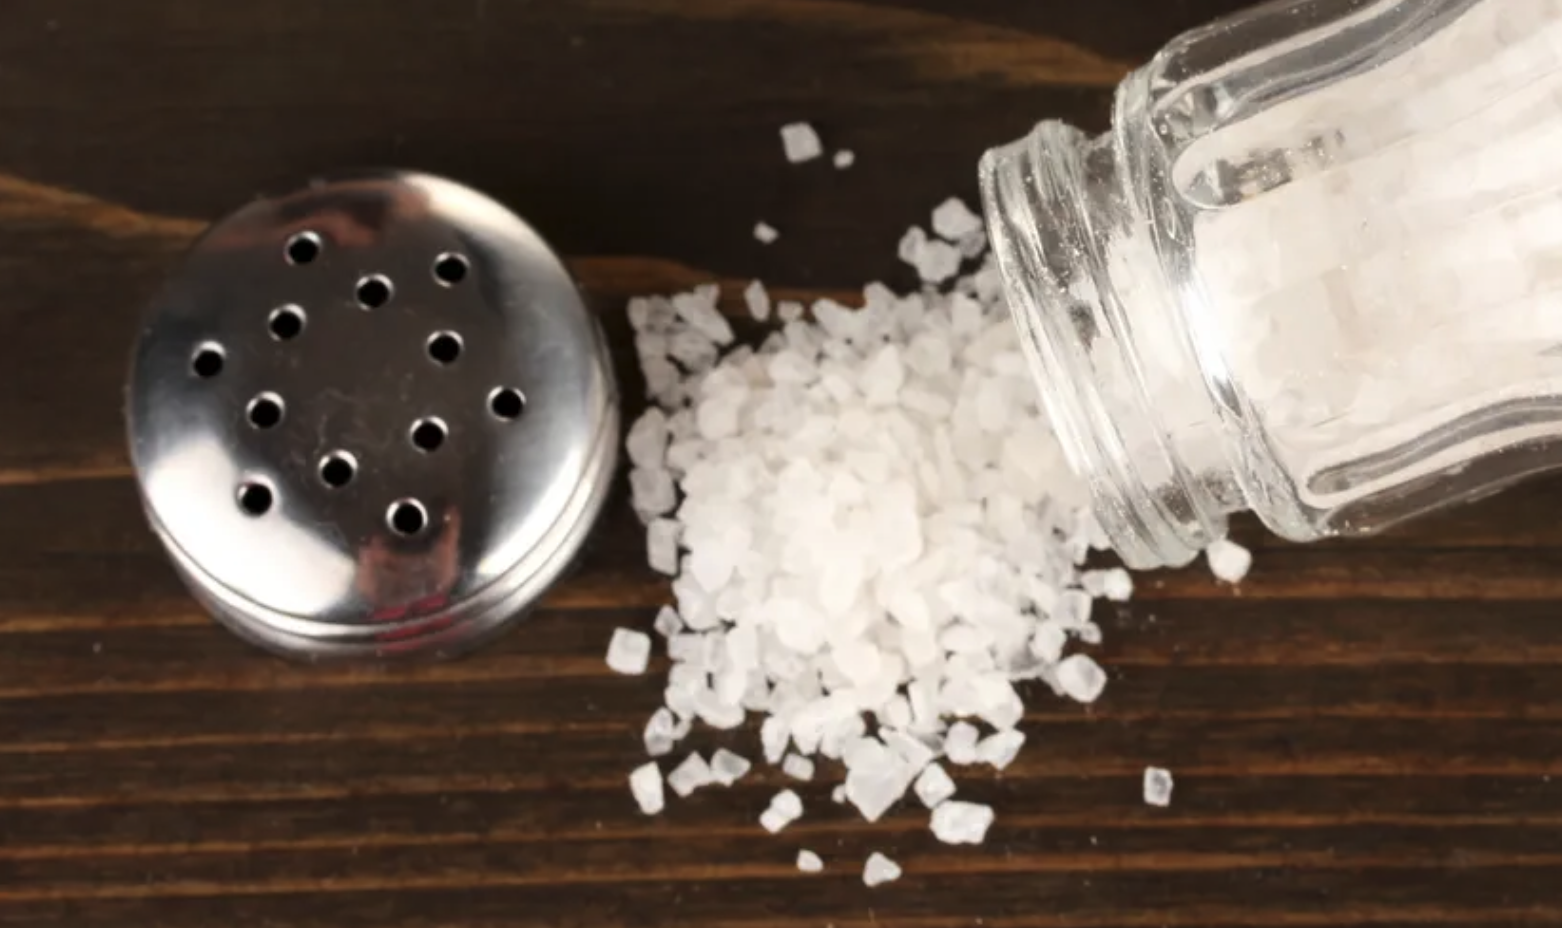 Why is it bad luck to spill salt?